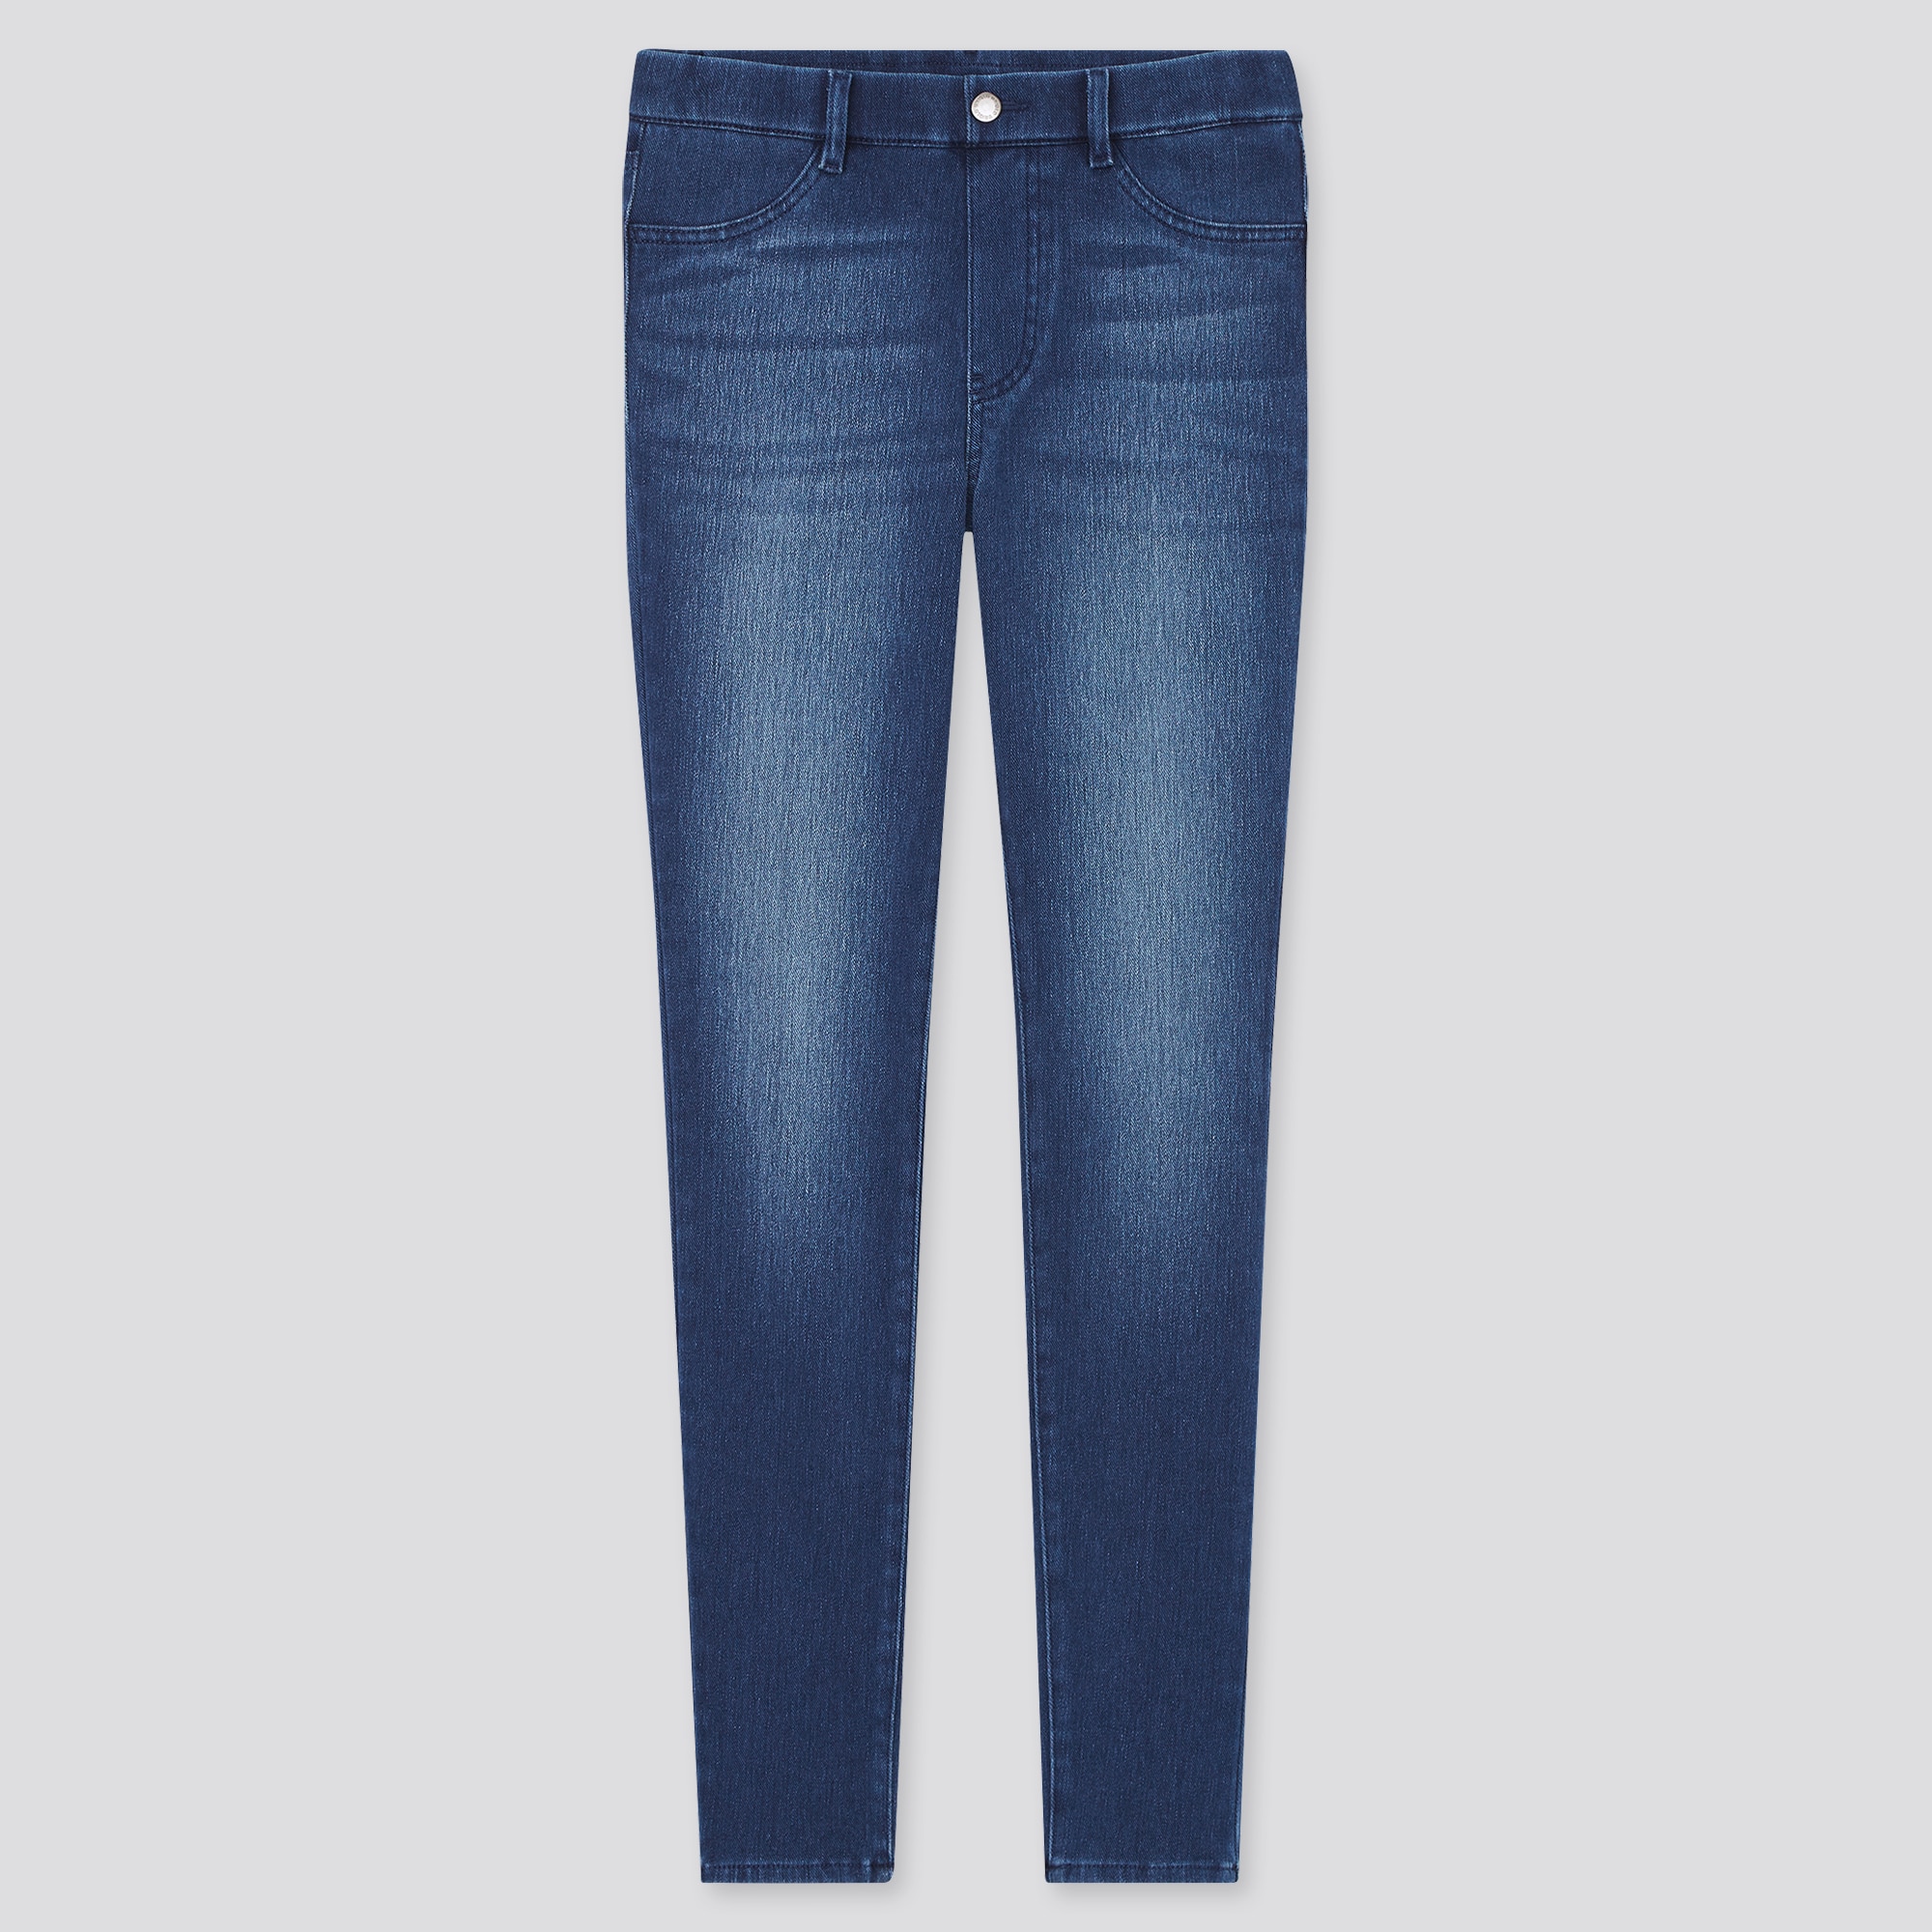 UNIQLO HEATTECH Ultra Stretch High-Rise Skinny Jeans | StyleHint